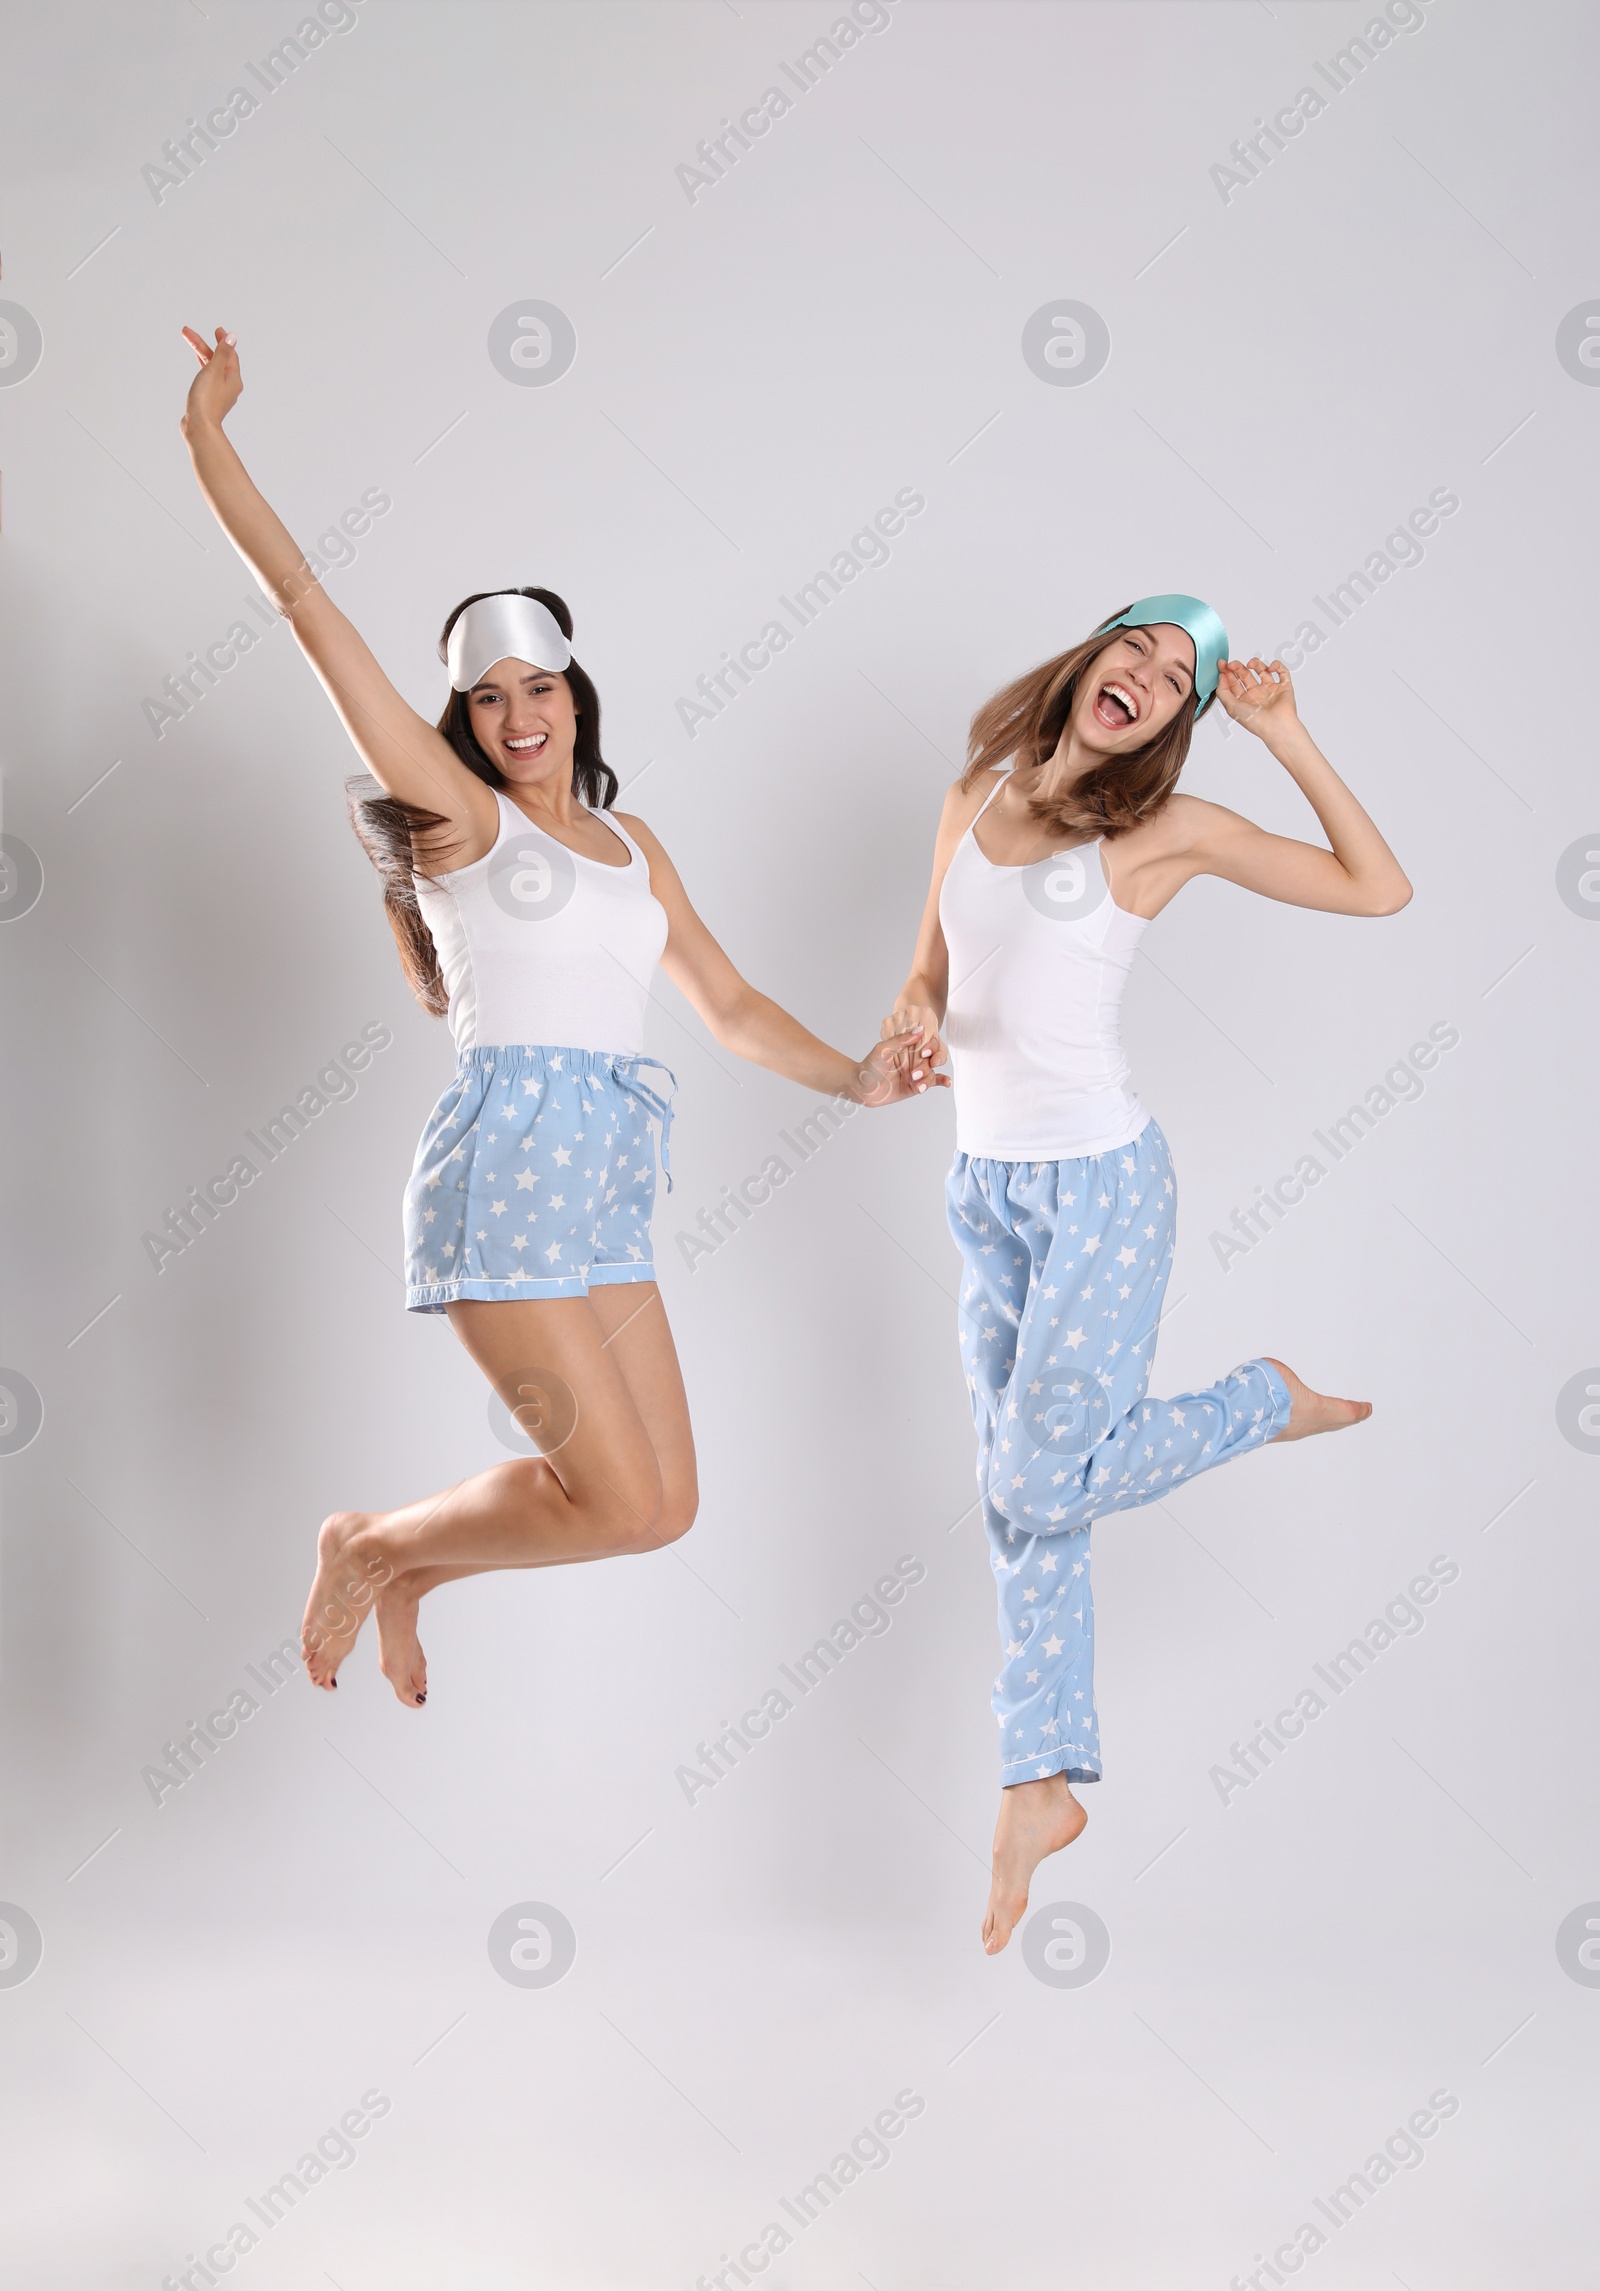 Photo of Beautiful women with sleeping masks jumping on light grey background. Bedtime